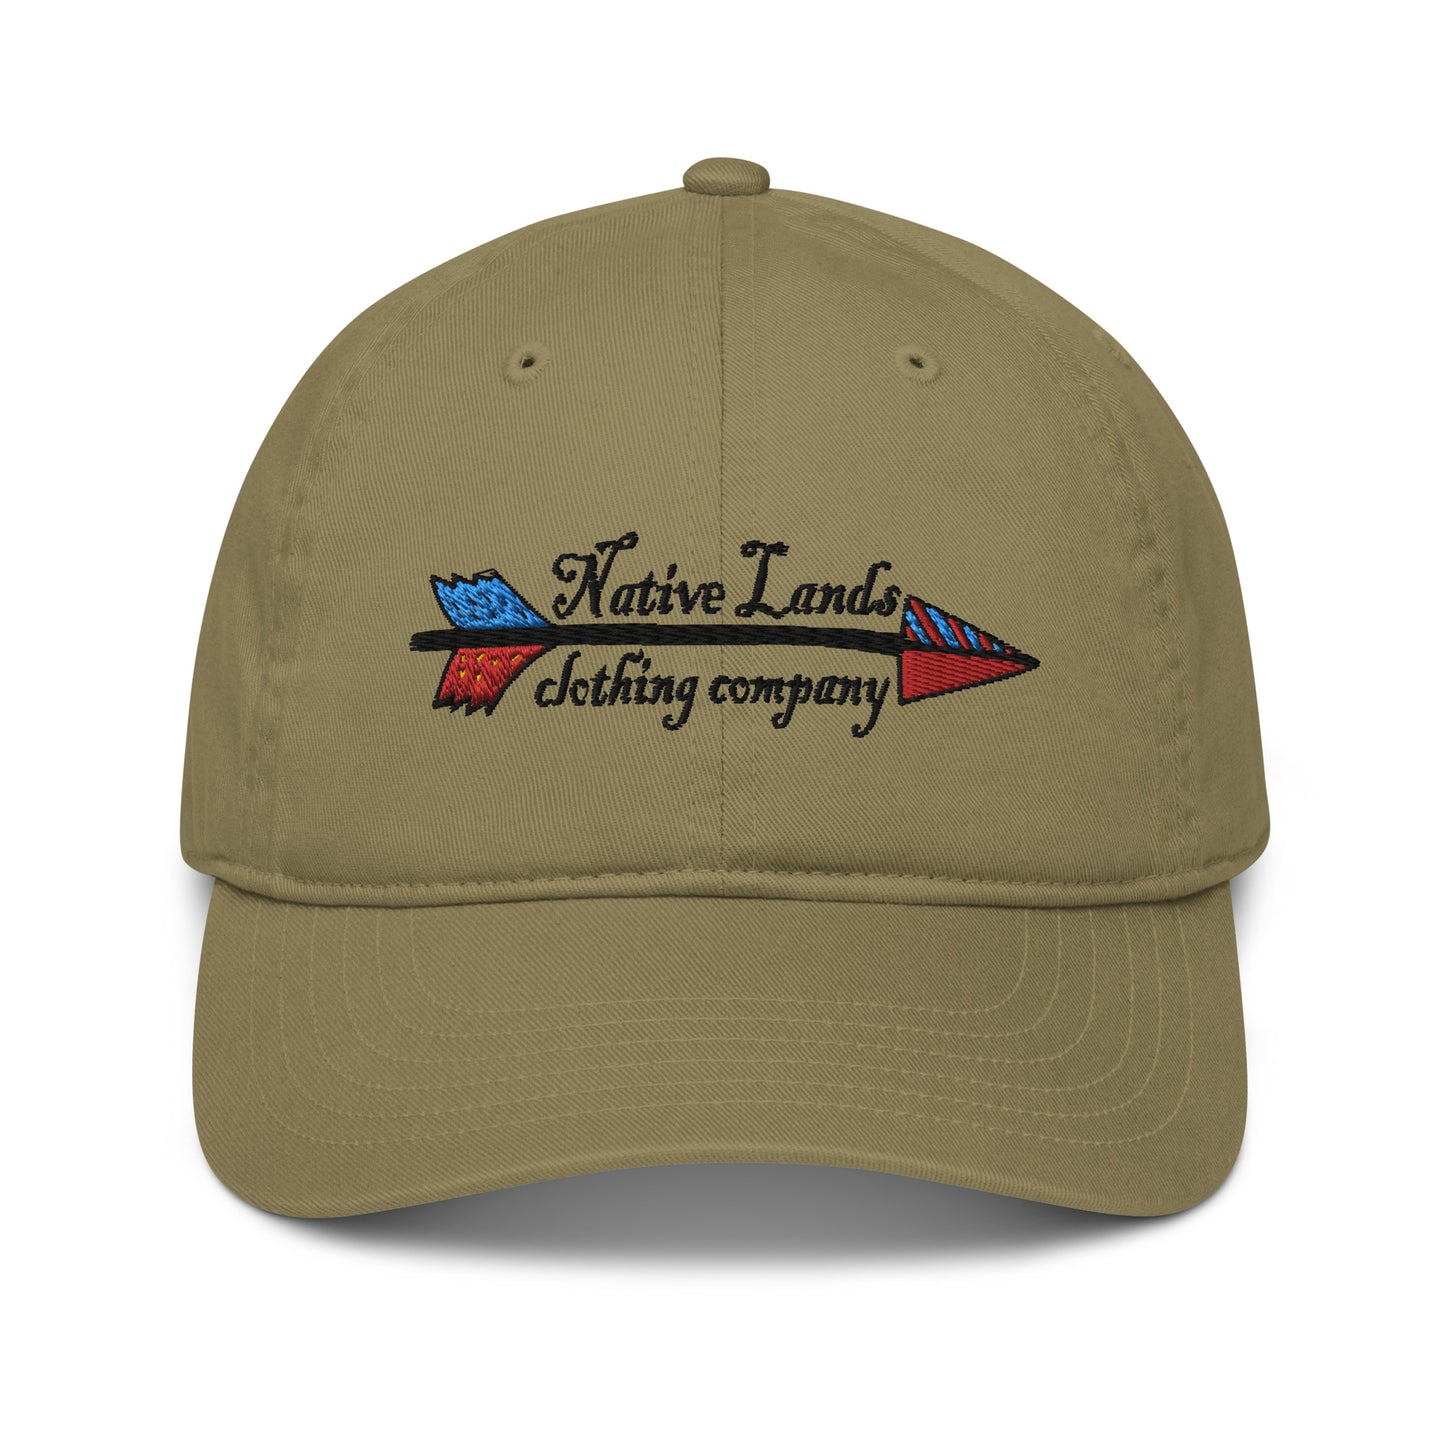 Organic Native Arrow Dad Hat Embroidered Native American